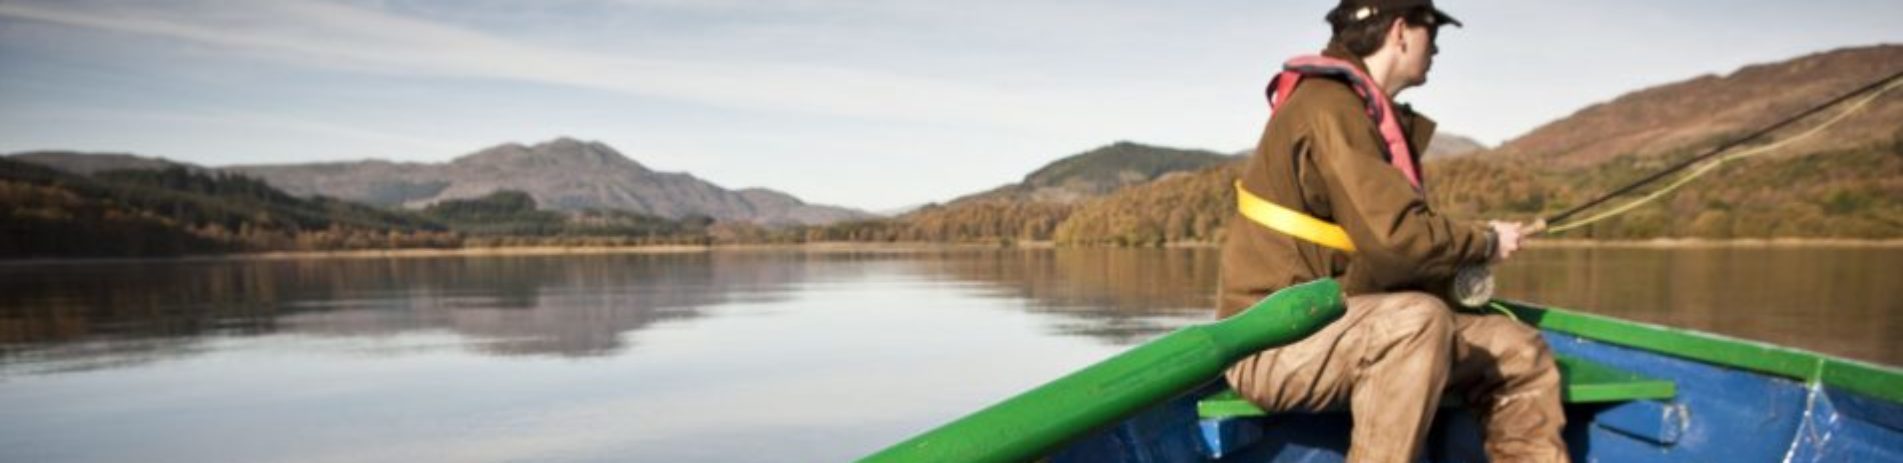 boat-fisherman-on-loch-with-mountain-background